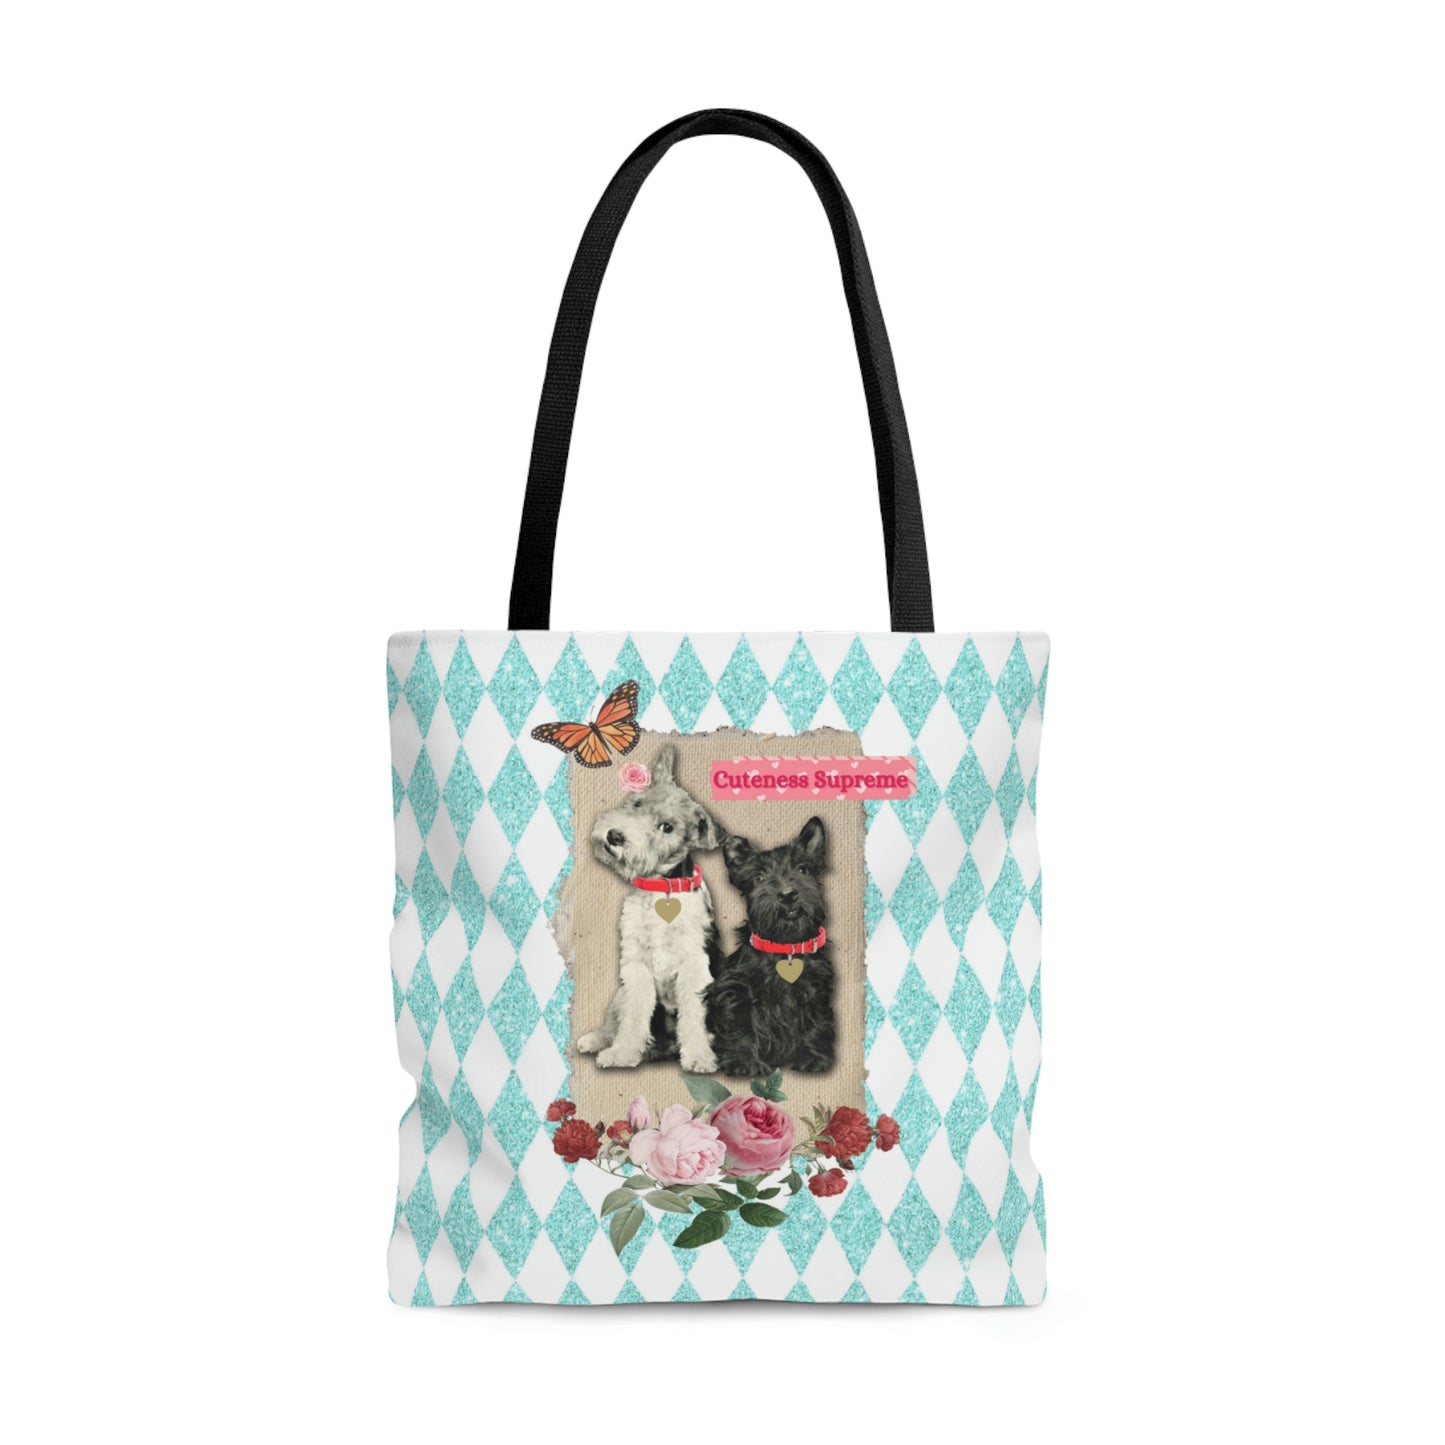 Cute Shopping Tote Bag in 3 Sizes, Aqua Glitter Harlequin Print, Mixed Media Graphic, Vintage Photo Jack Russell Terrier, Scotty Dog, Roses